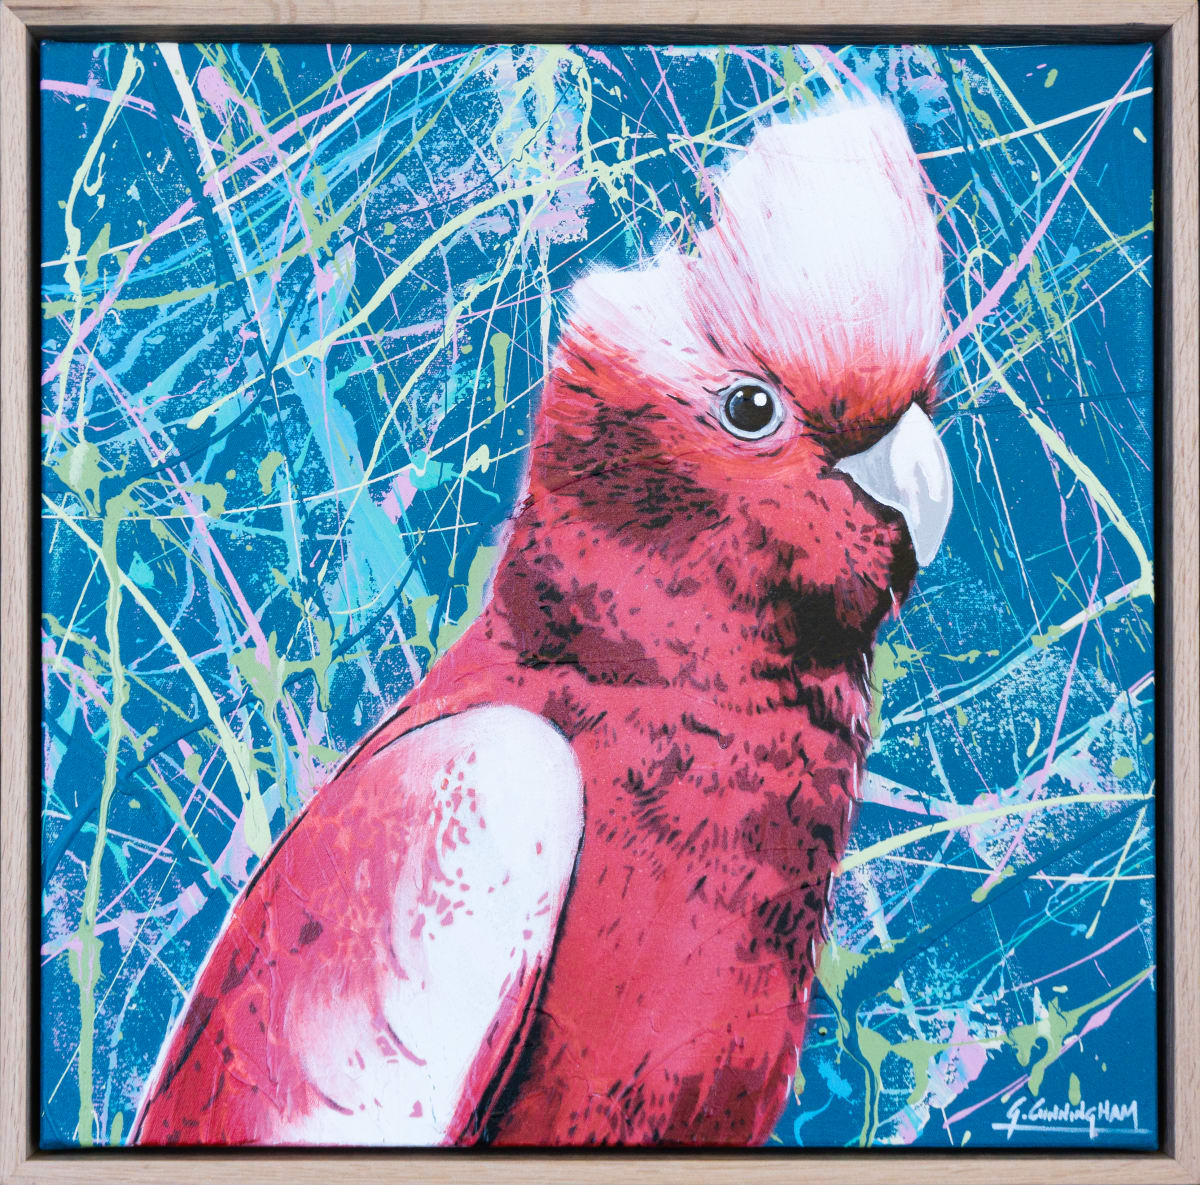 Silly Bloody Galah #2 by Geoff Cunningham  Image: Sometimes I need a change from doing streetscapes, so I turn to my secret love of birds. They are fun to paint, especially the Australian Galah as they have so much personality! 